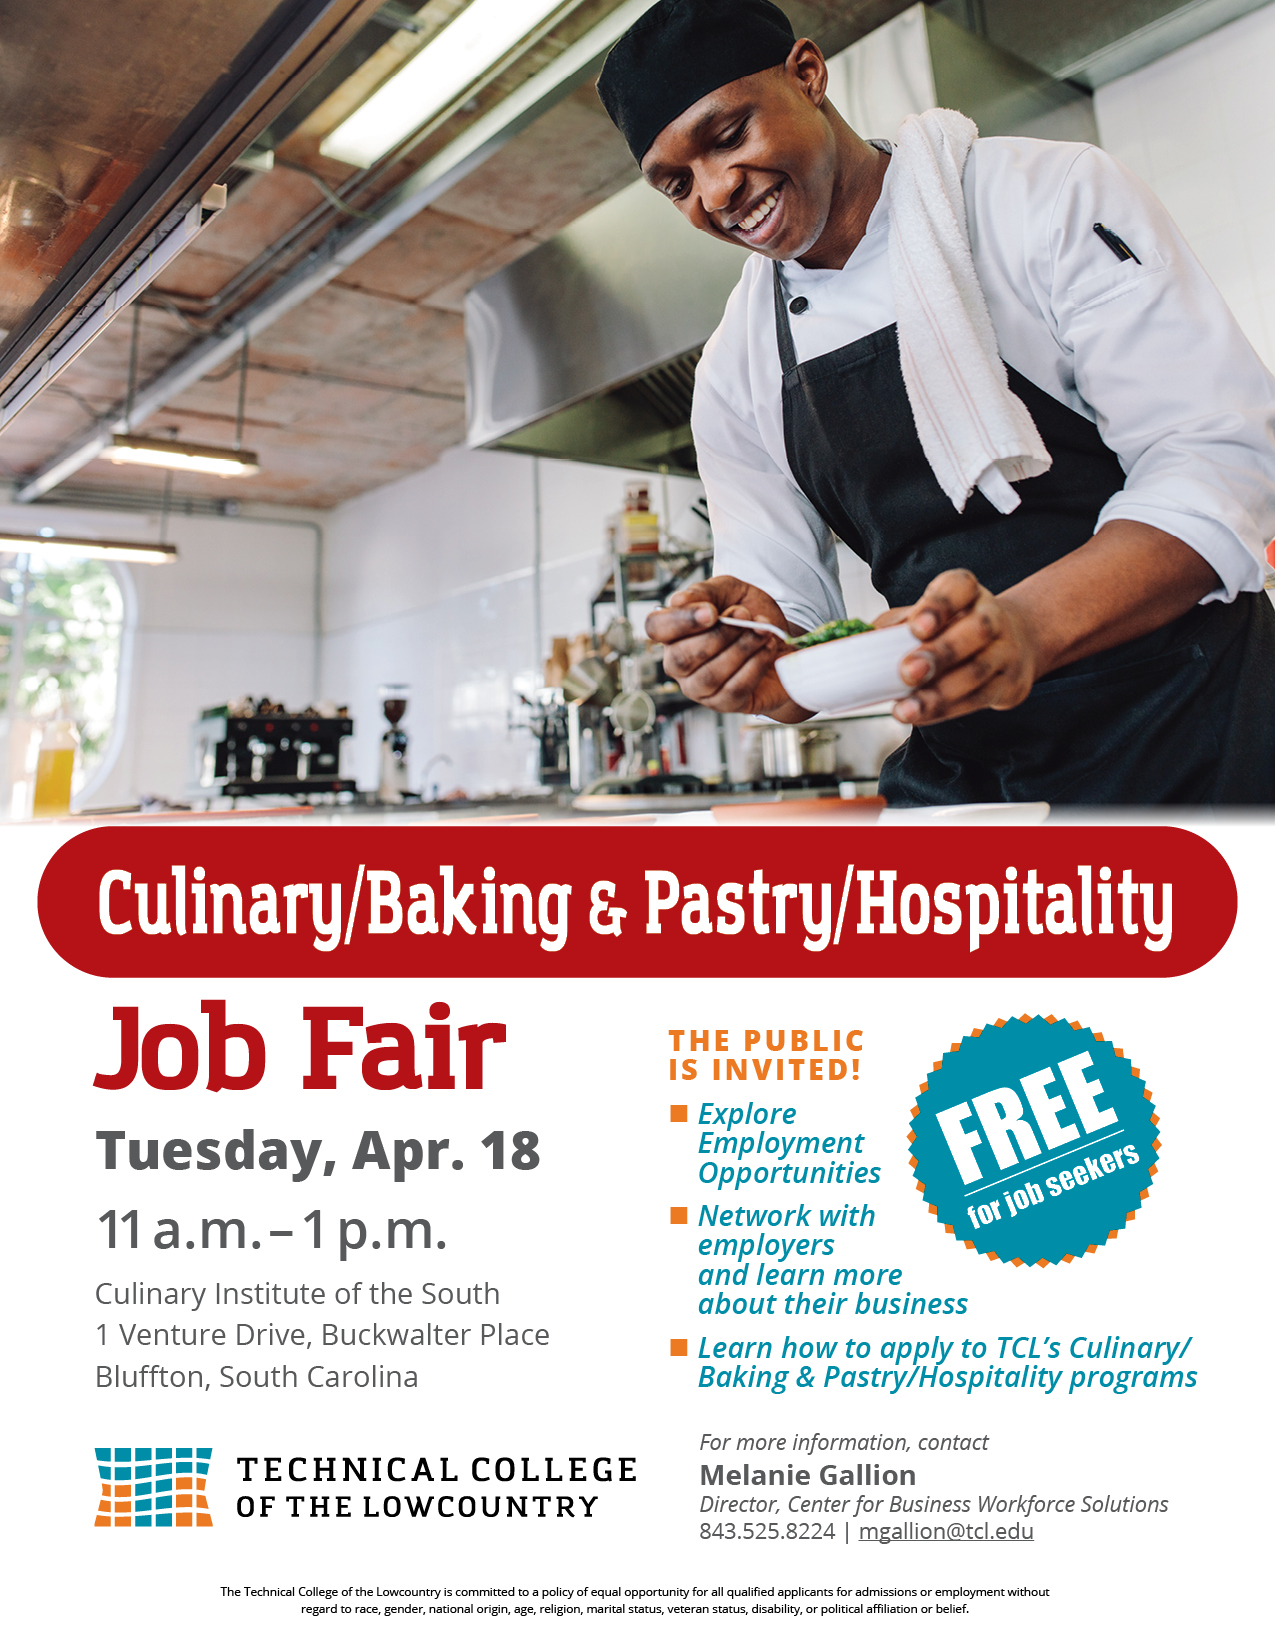 Job Fair: Culinary / Baking & Pastry / Hospitality - Technical College of  the Lowcountry